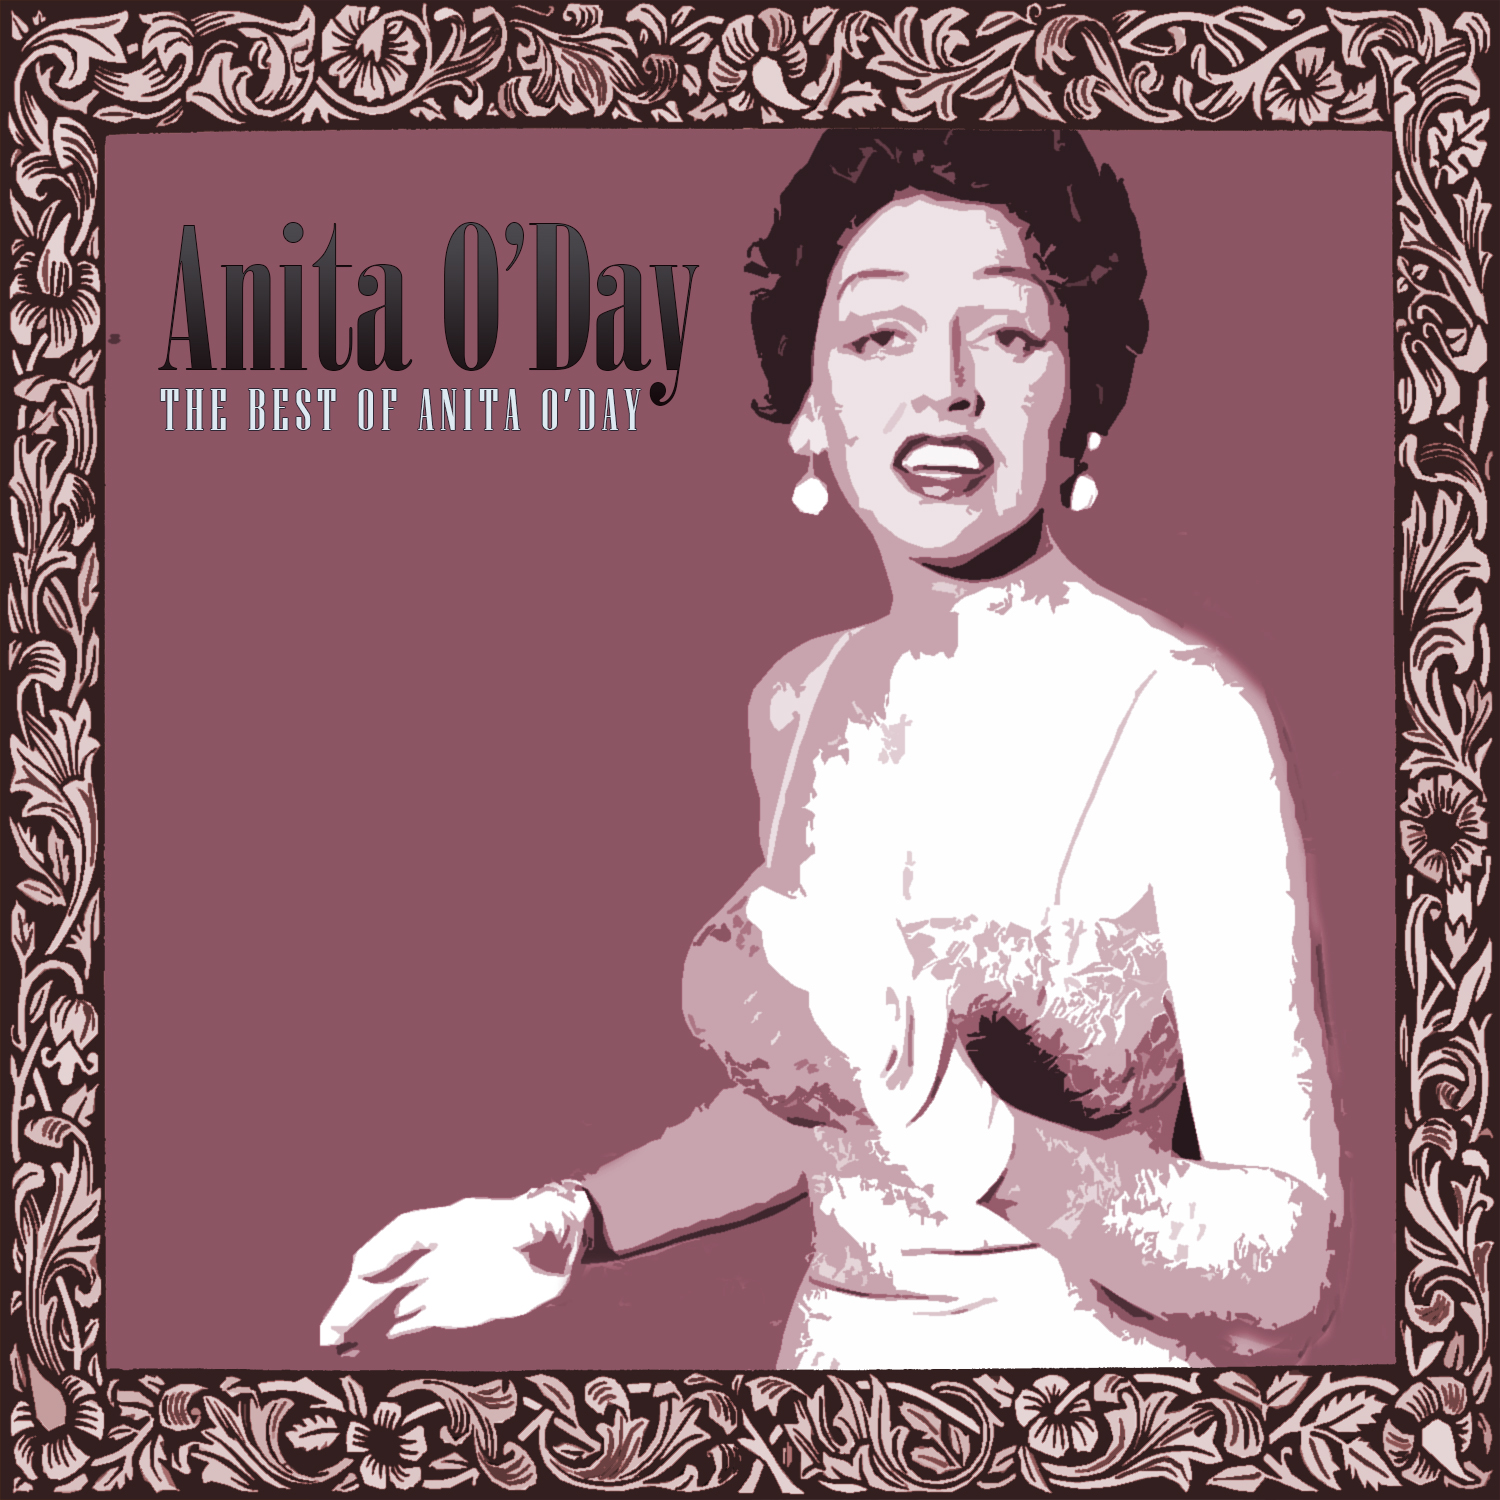 The Best of Anita O'Day